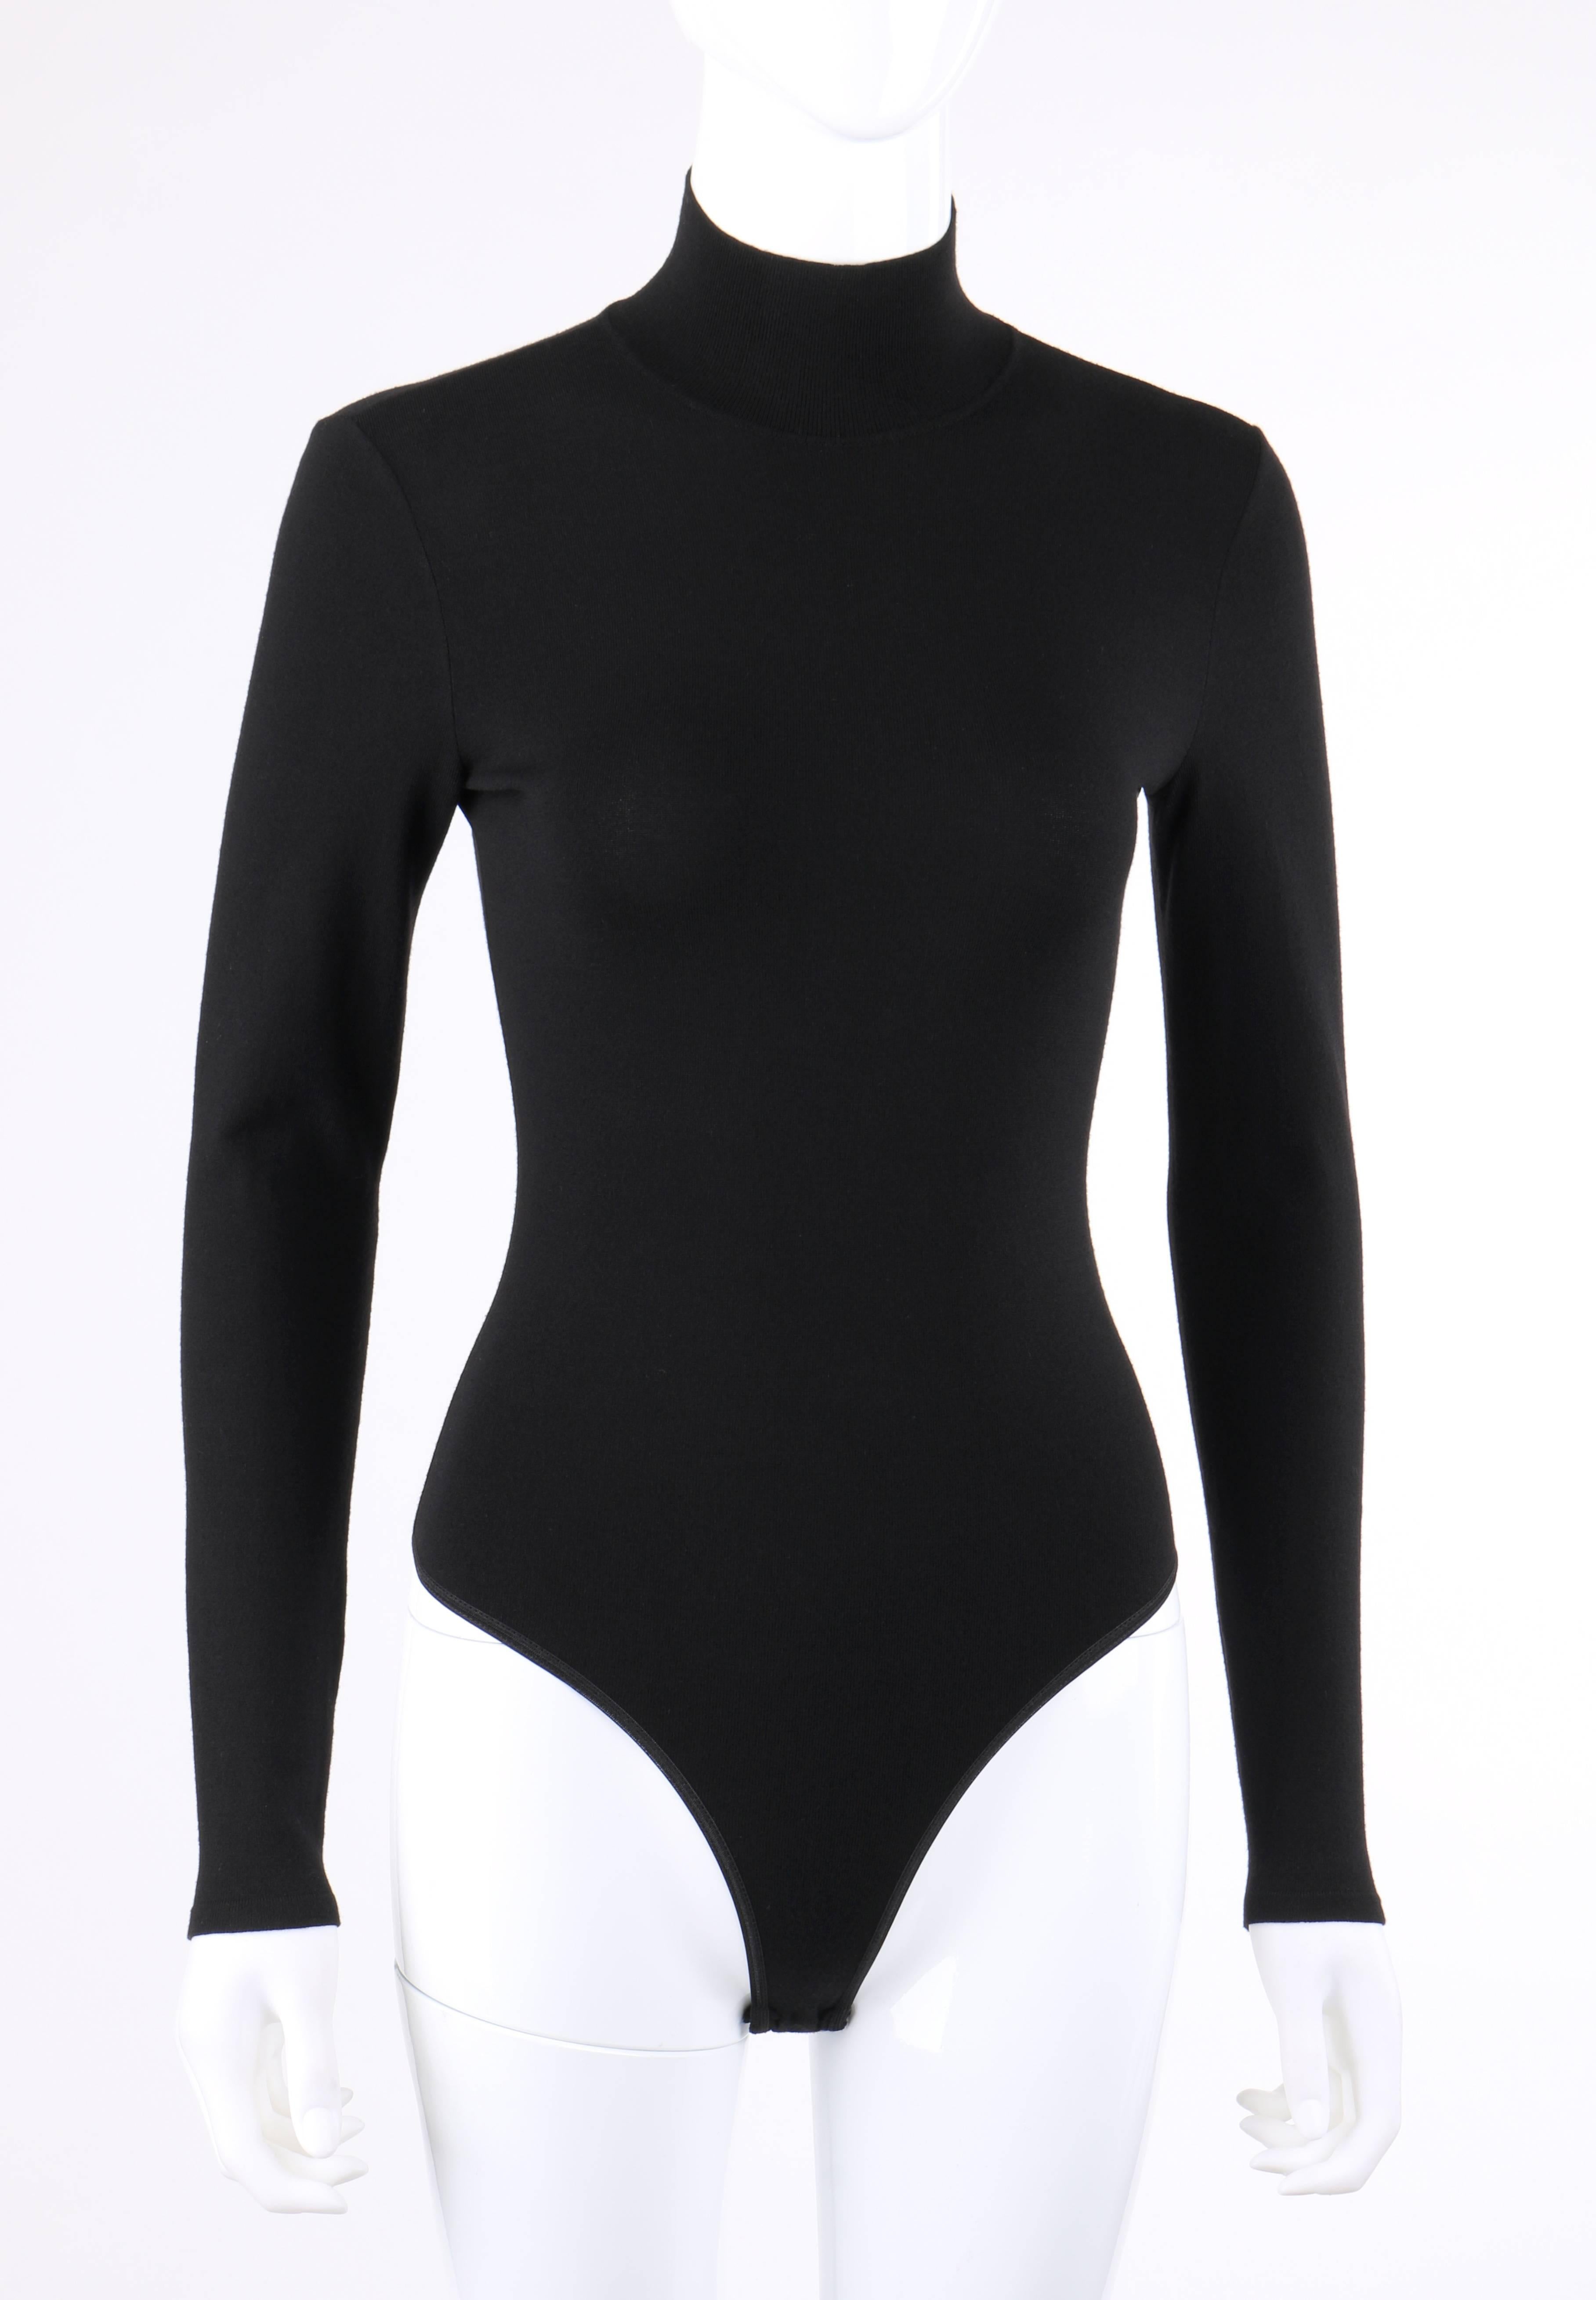 Alaia Paris black wool blend knit bodysuit; New without tags. Rib knit mock neck. Long sleeves. Elasticized high cut leg holes with thong back. Three snap closures at crotch. Pull over style. Marked Fabric Content: 